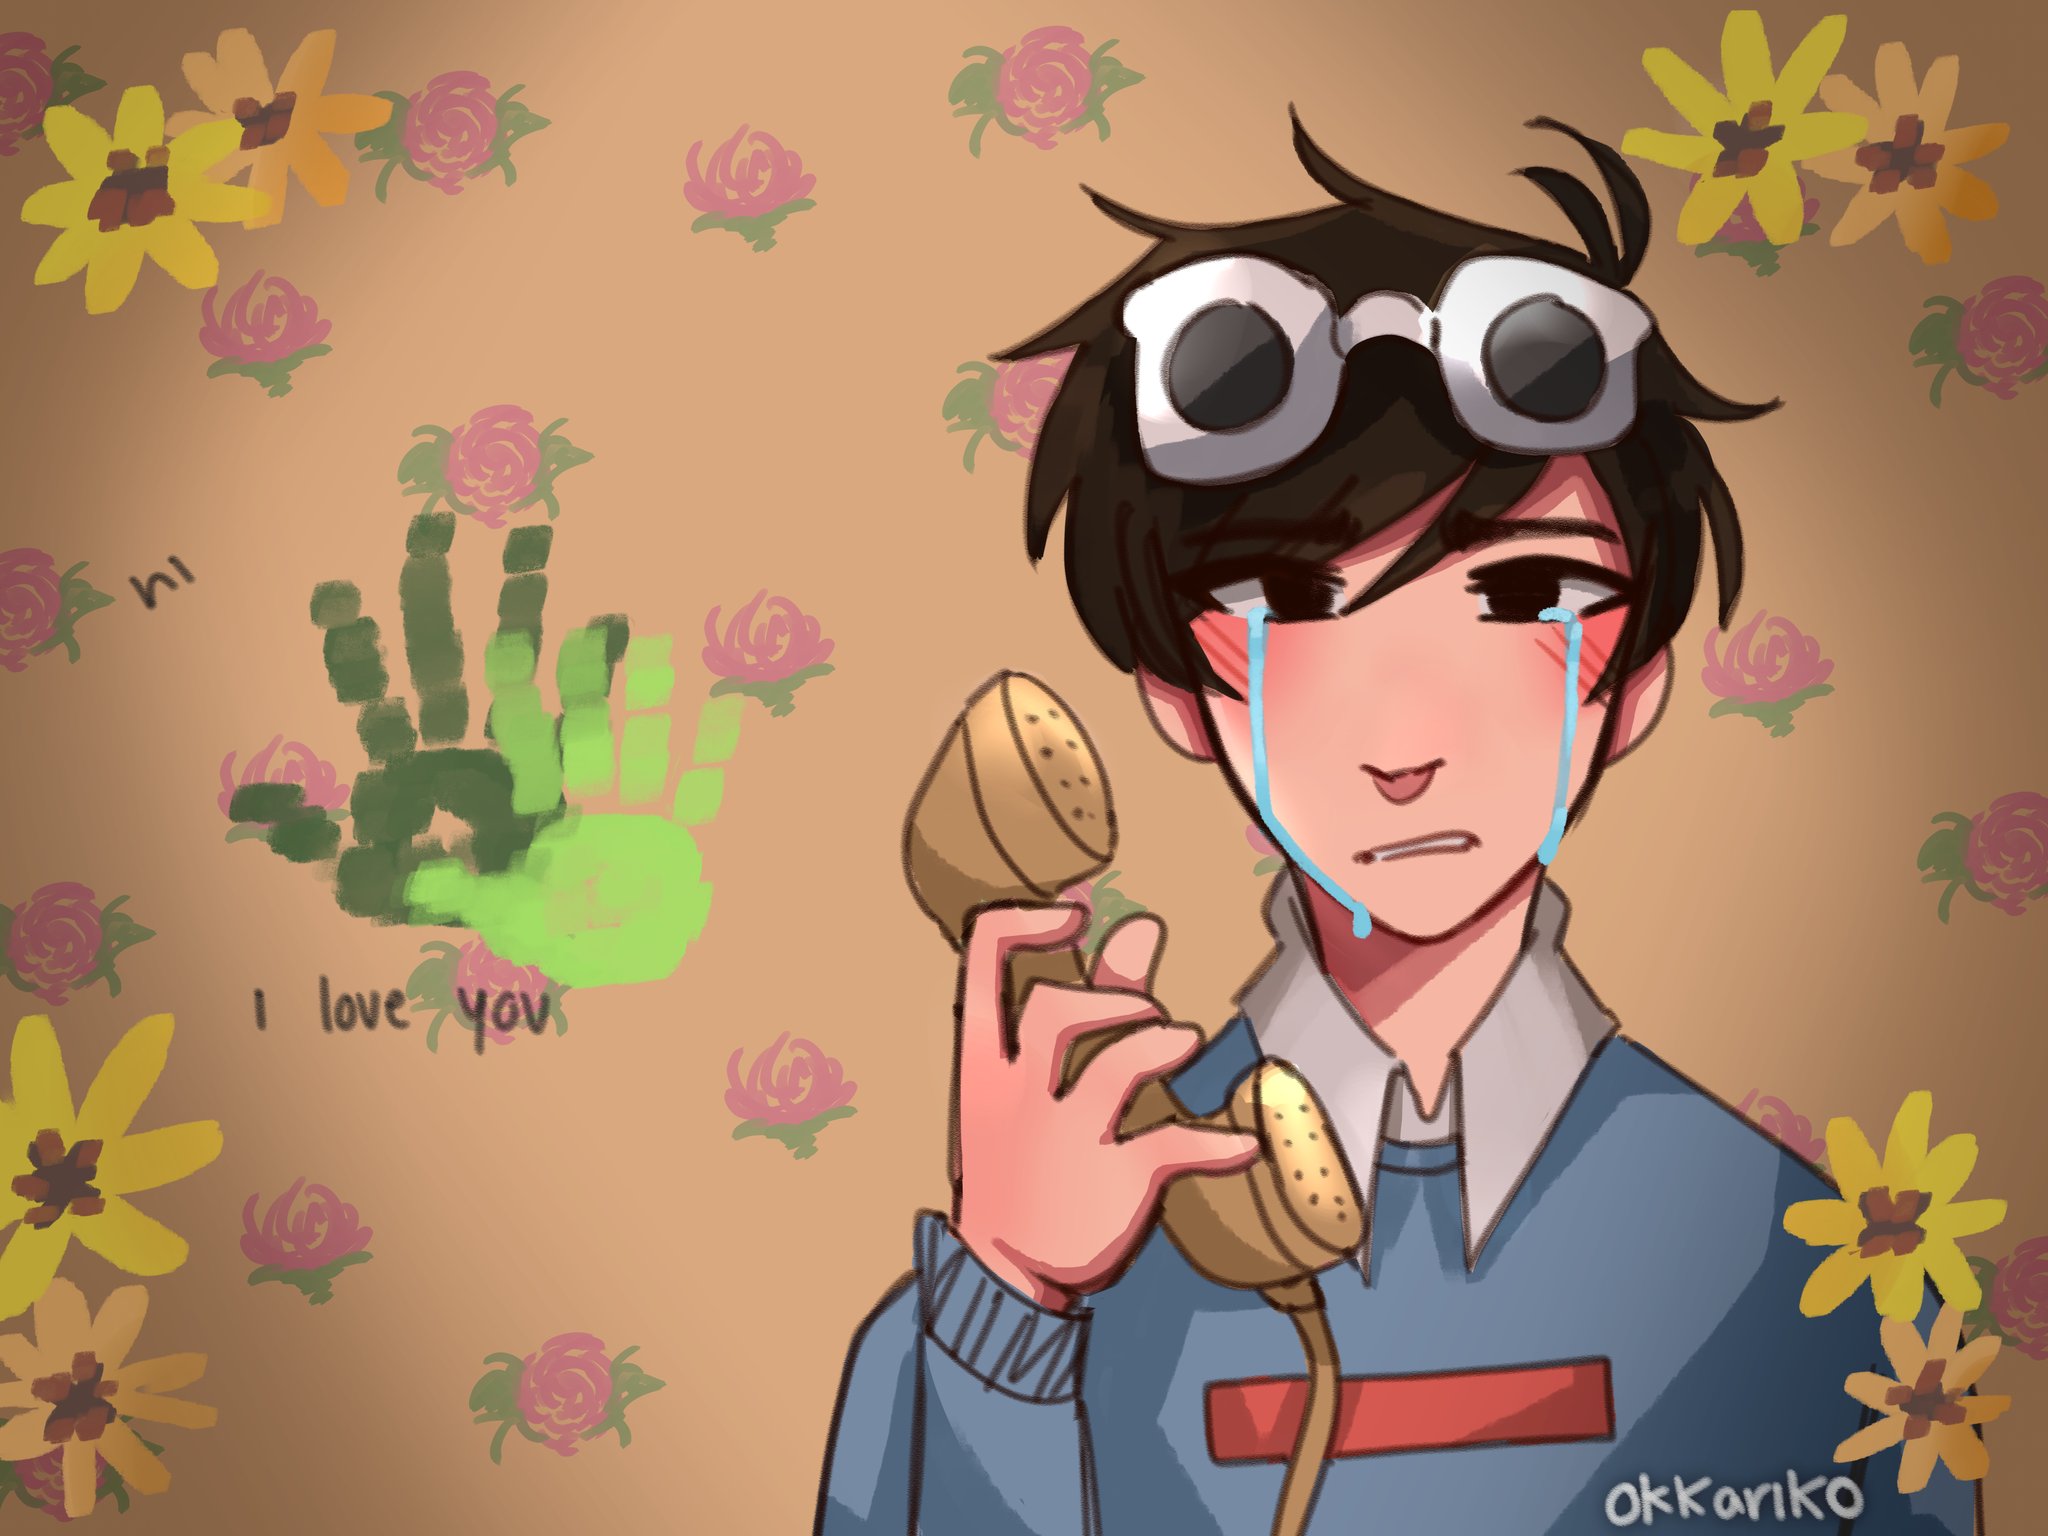 Flowers from 1970 wallpaper by littlequackity on DeviantArt